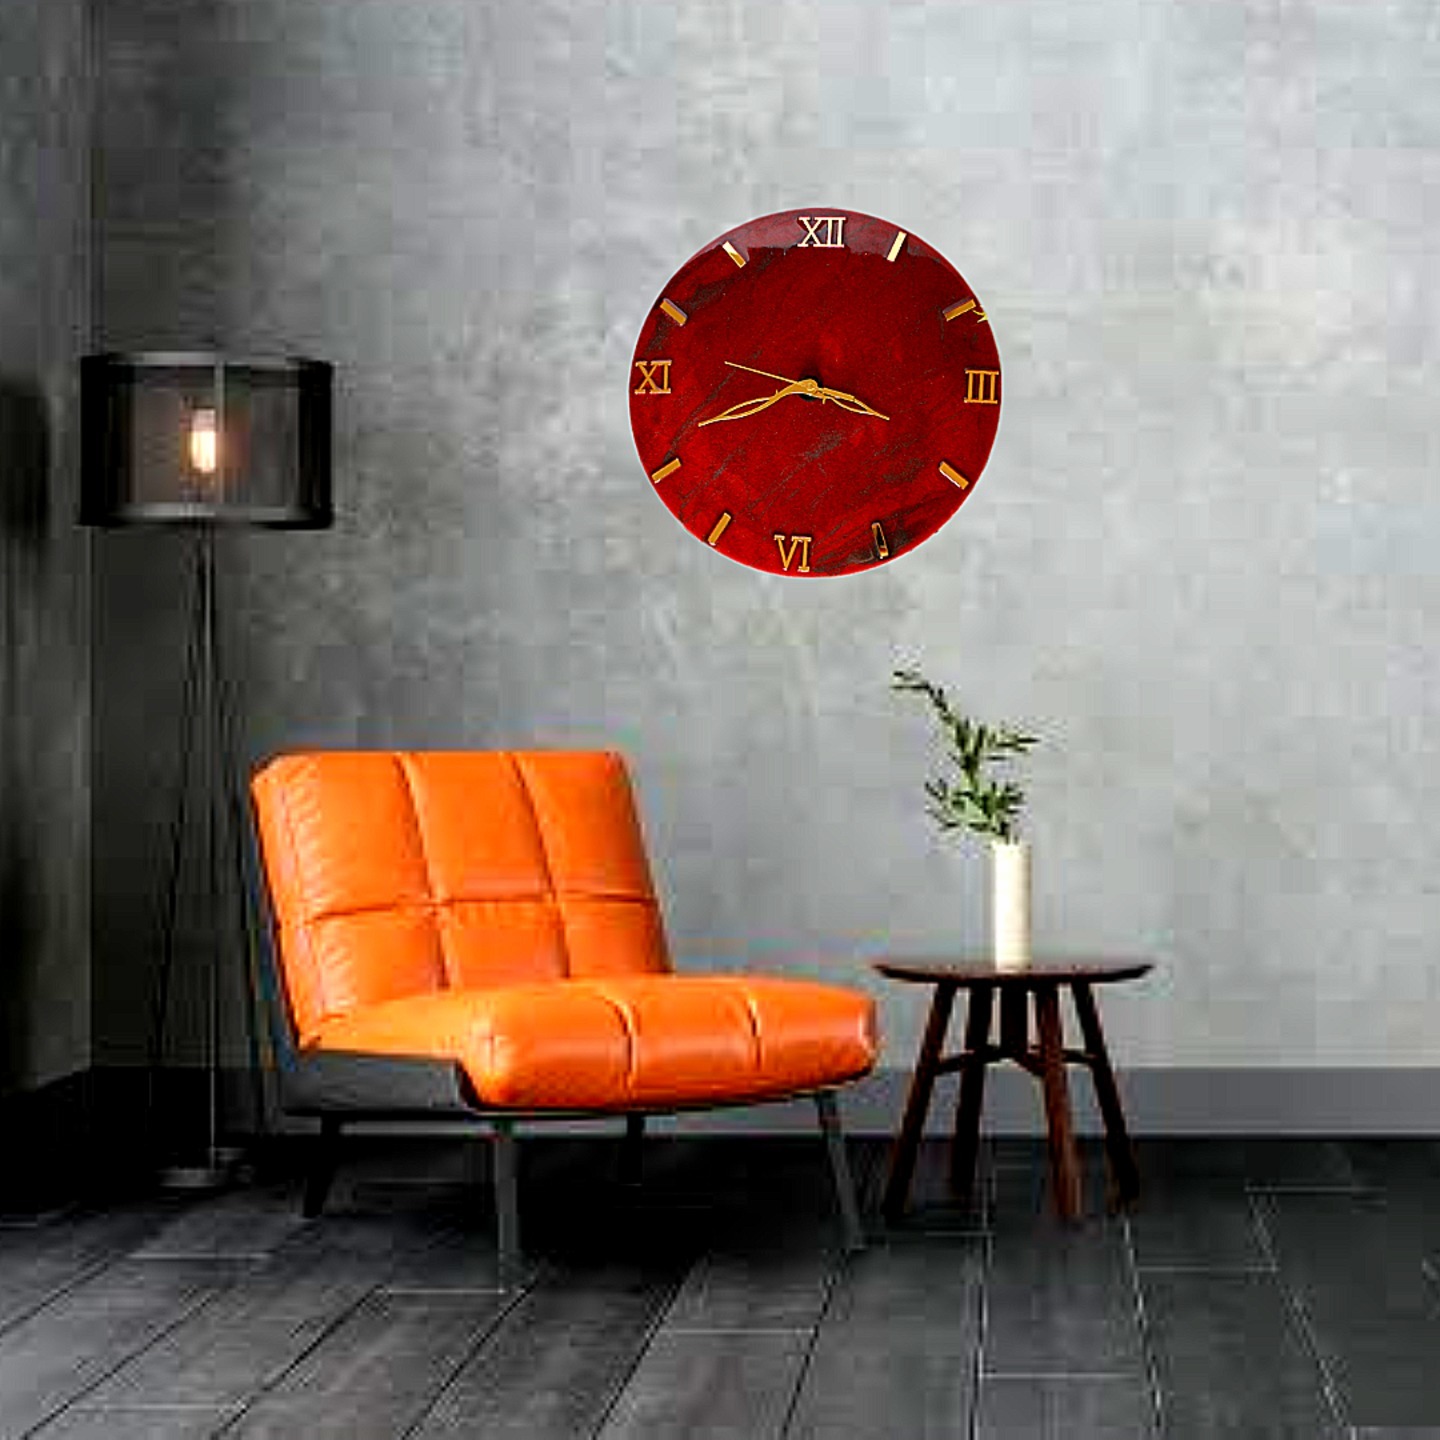 Wall Clock Red wine & sheds of grey